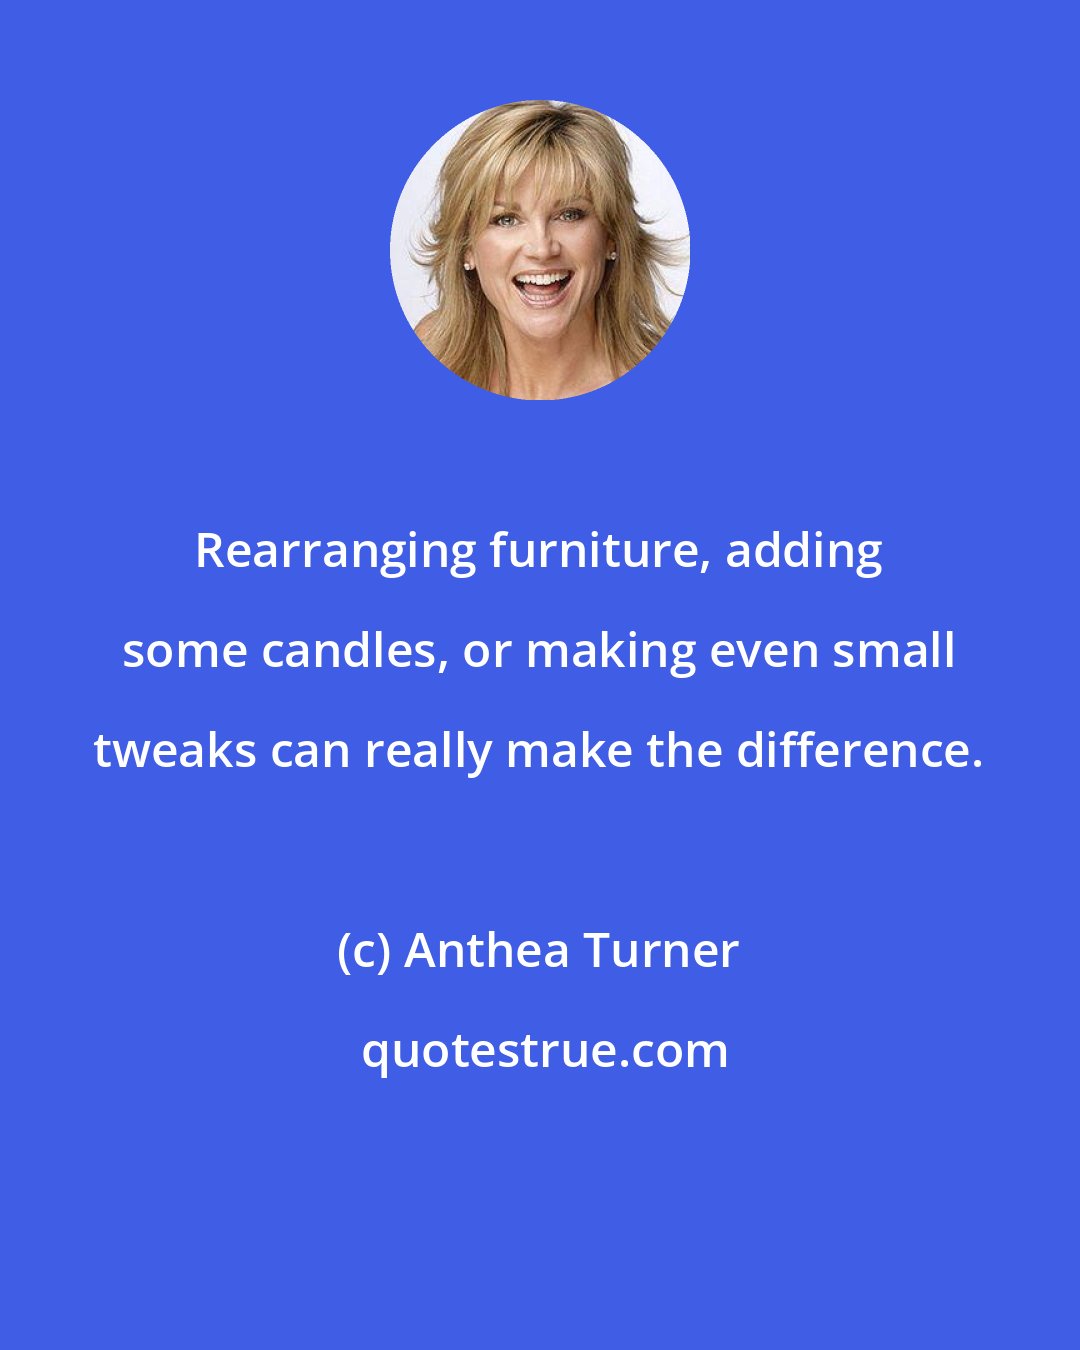 Anthea Turner: Rearranging furniture, adding some candles, or making even small tweaks can really make the difference.